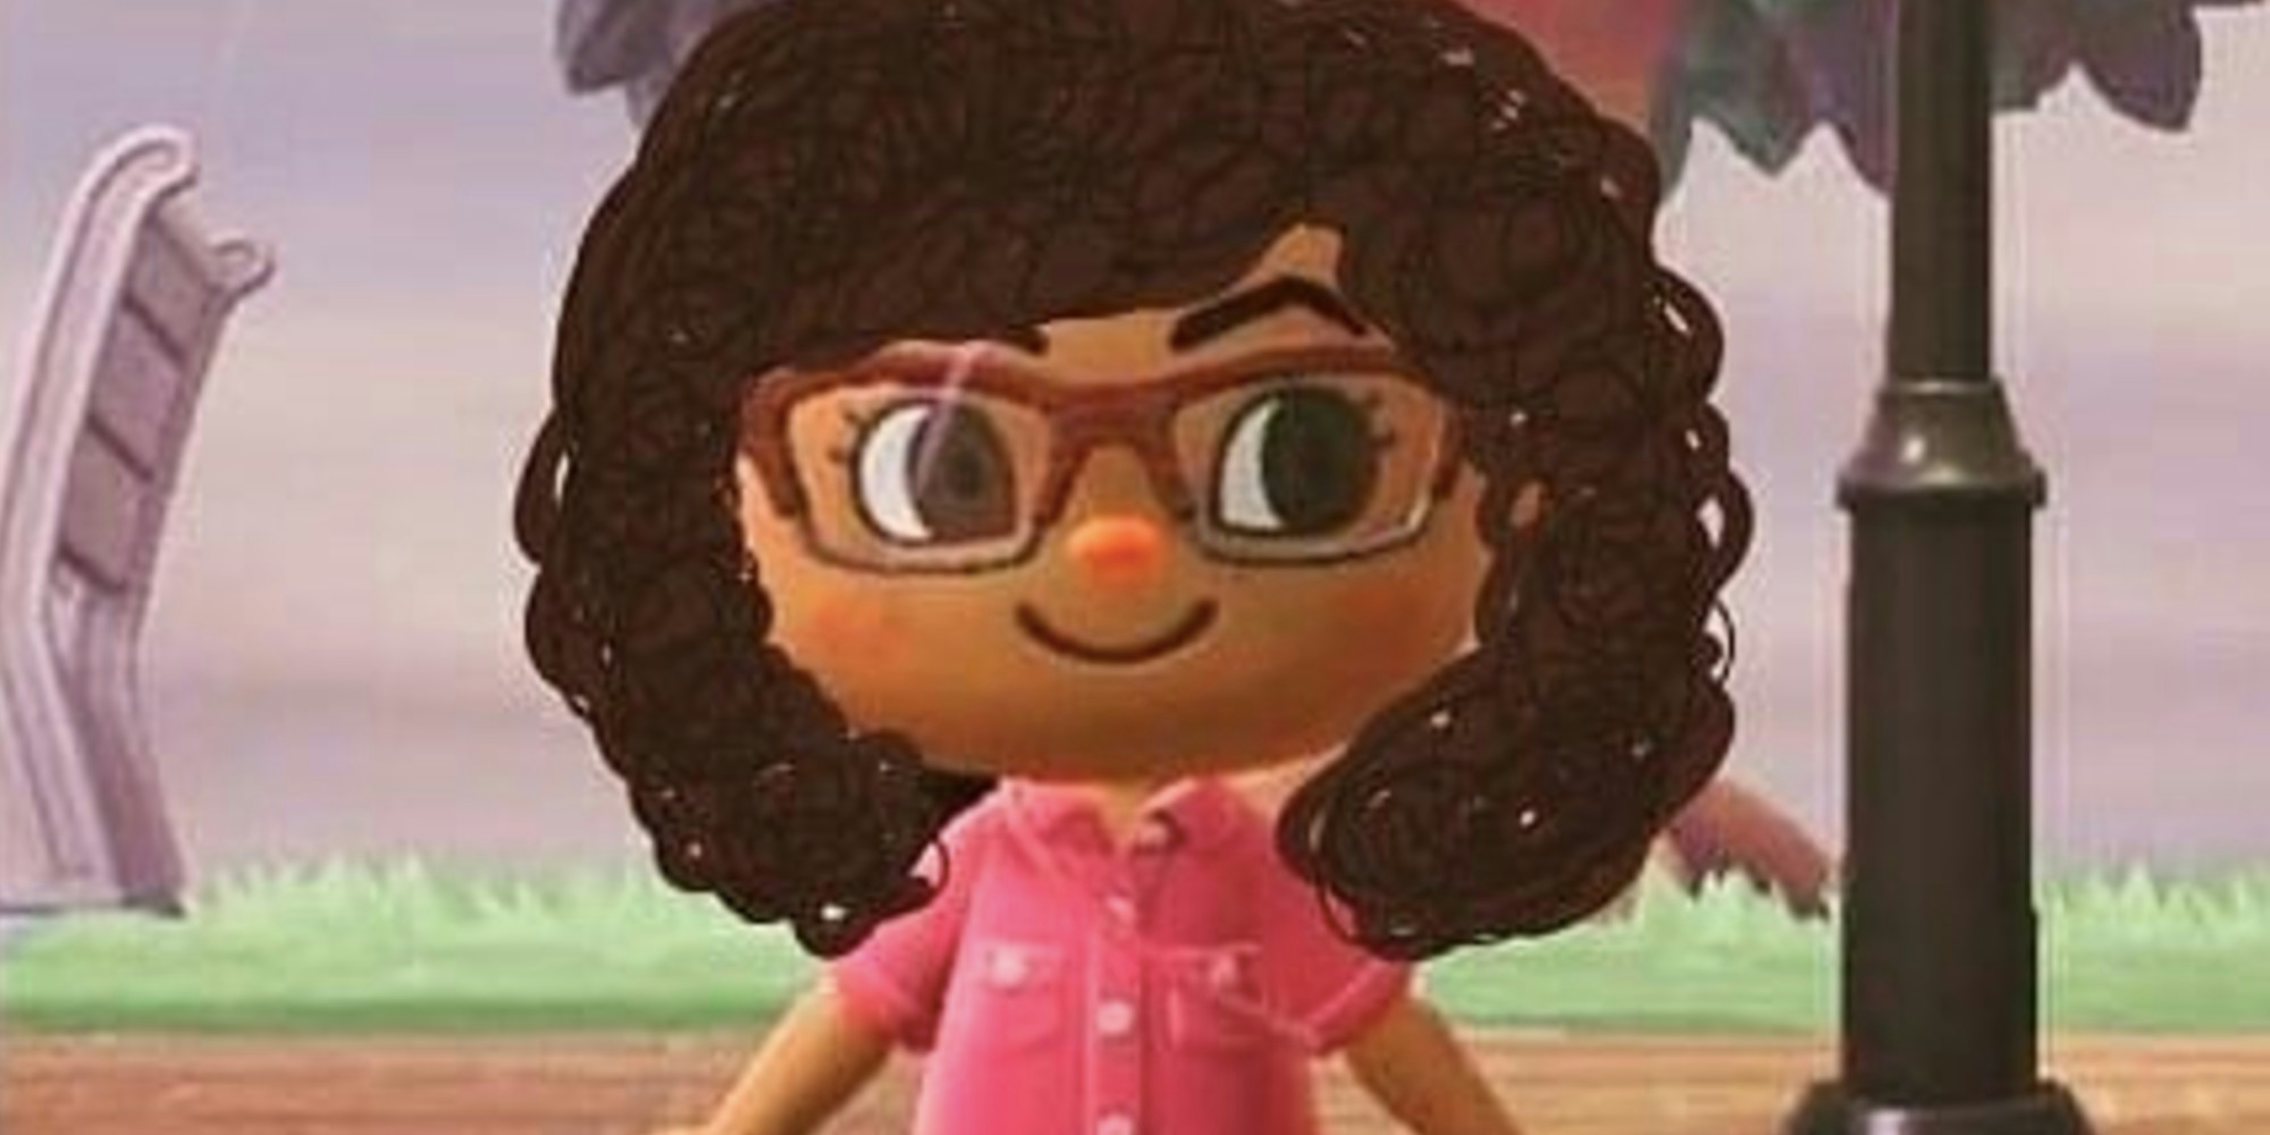 animal crossing character with curly hair